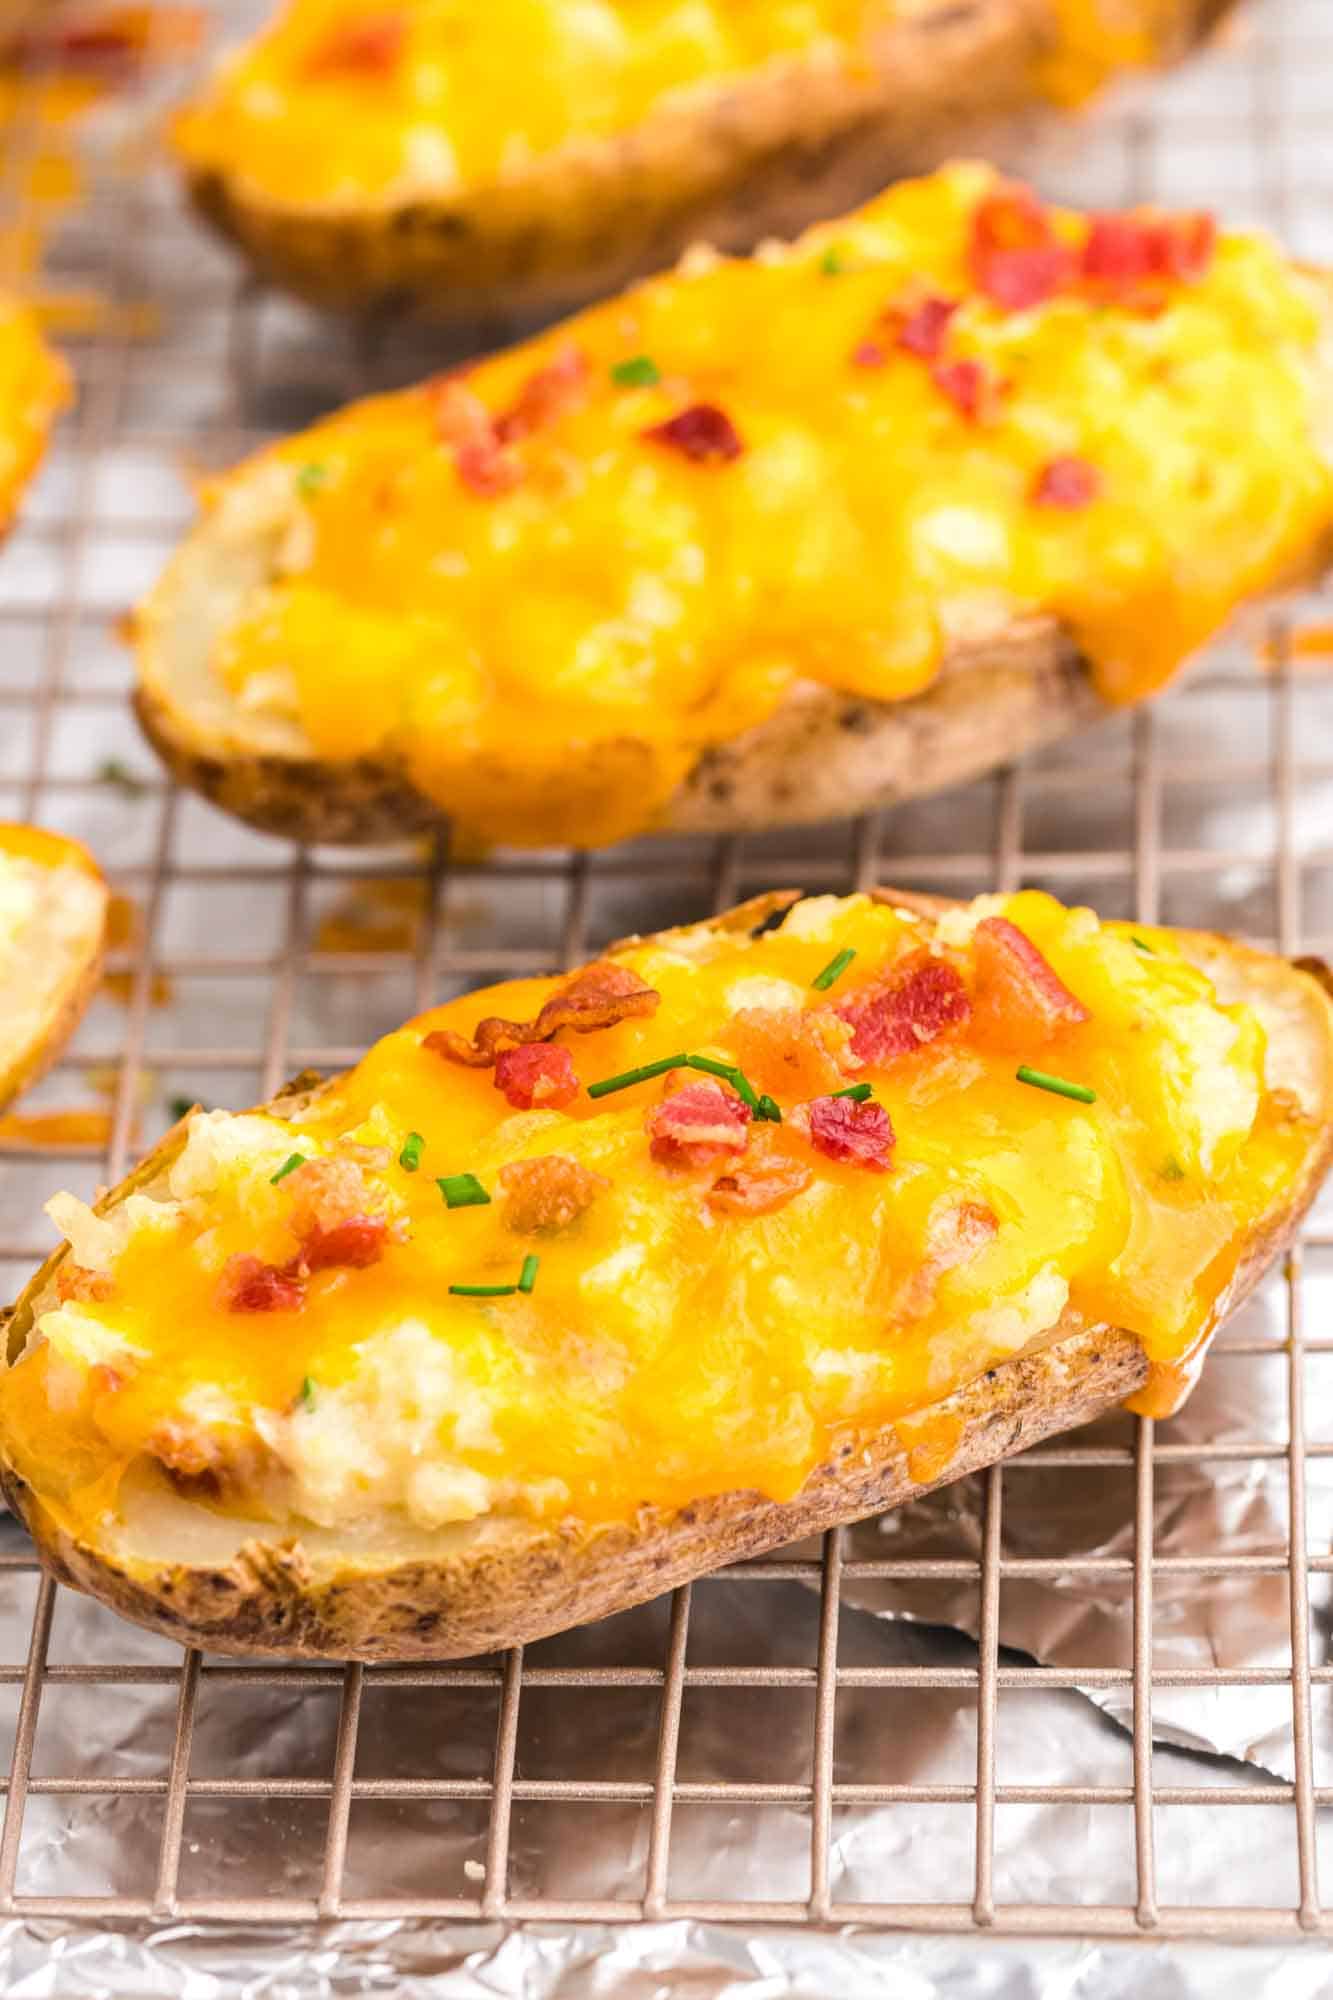 Twice baked potatoes placed on a wire rack